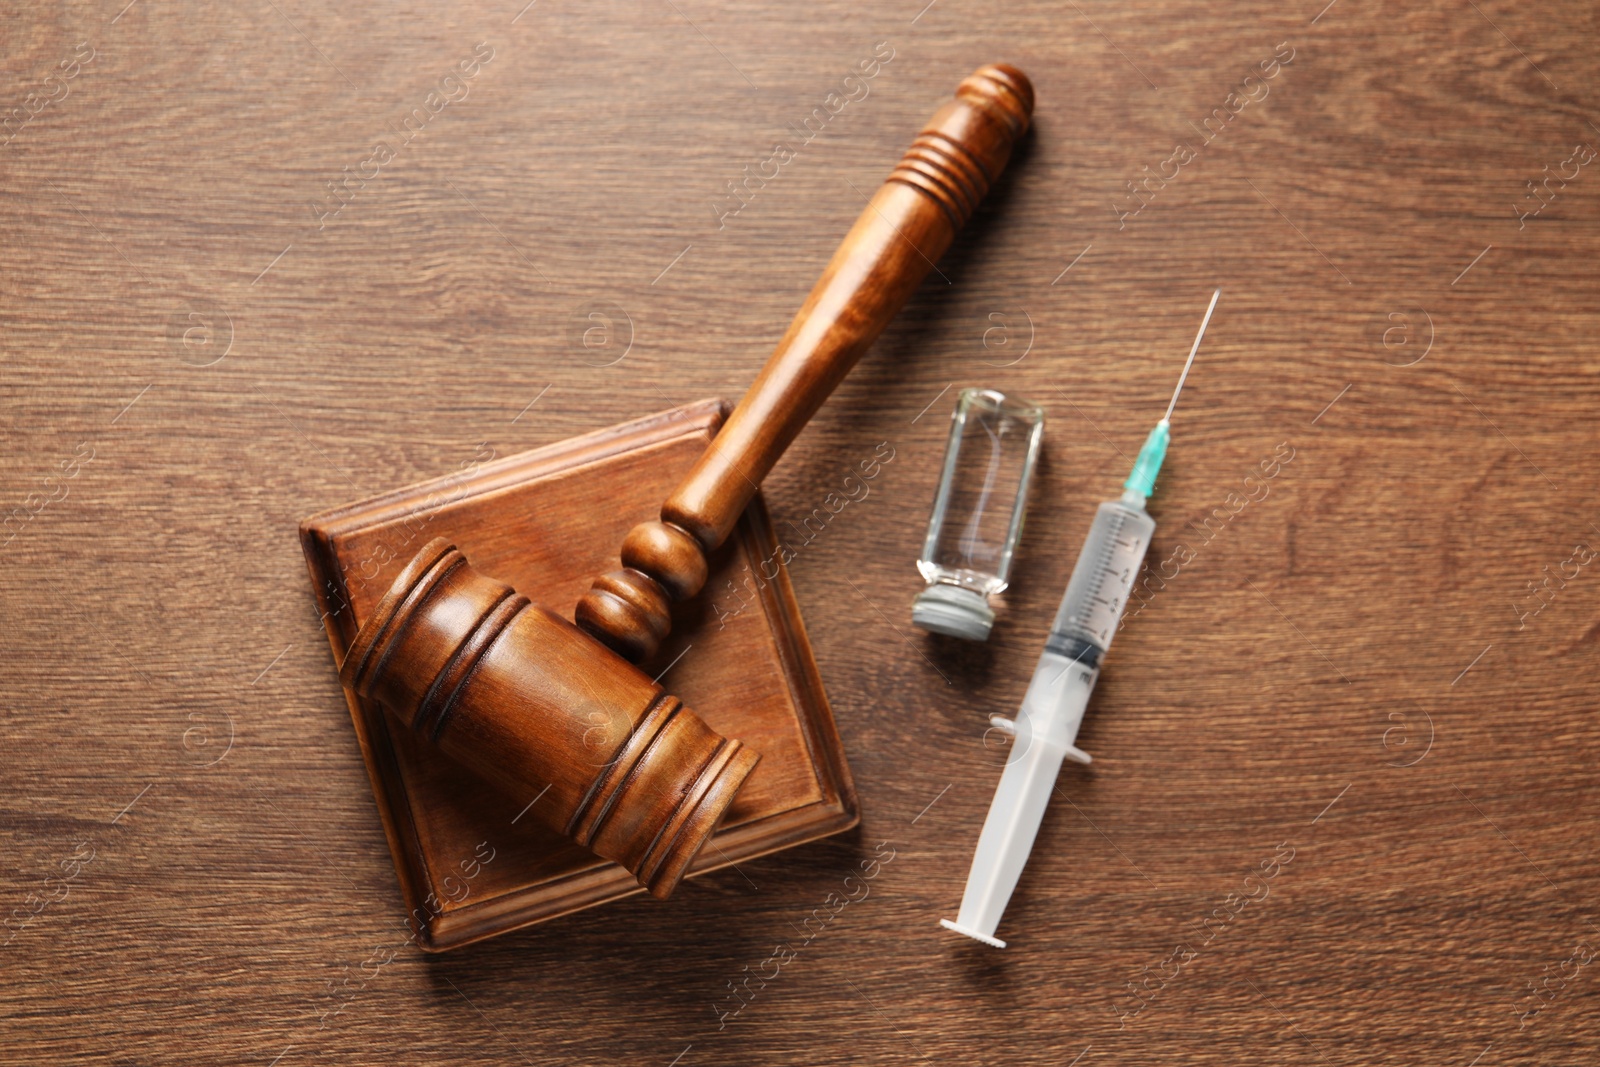 Photo of Law concept. Gavel, syringe and glass vial on wooden table, top view